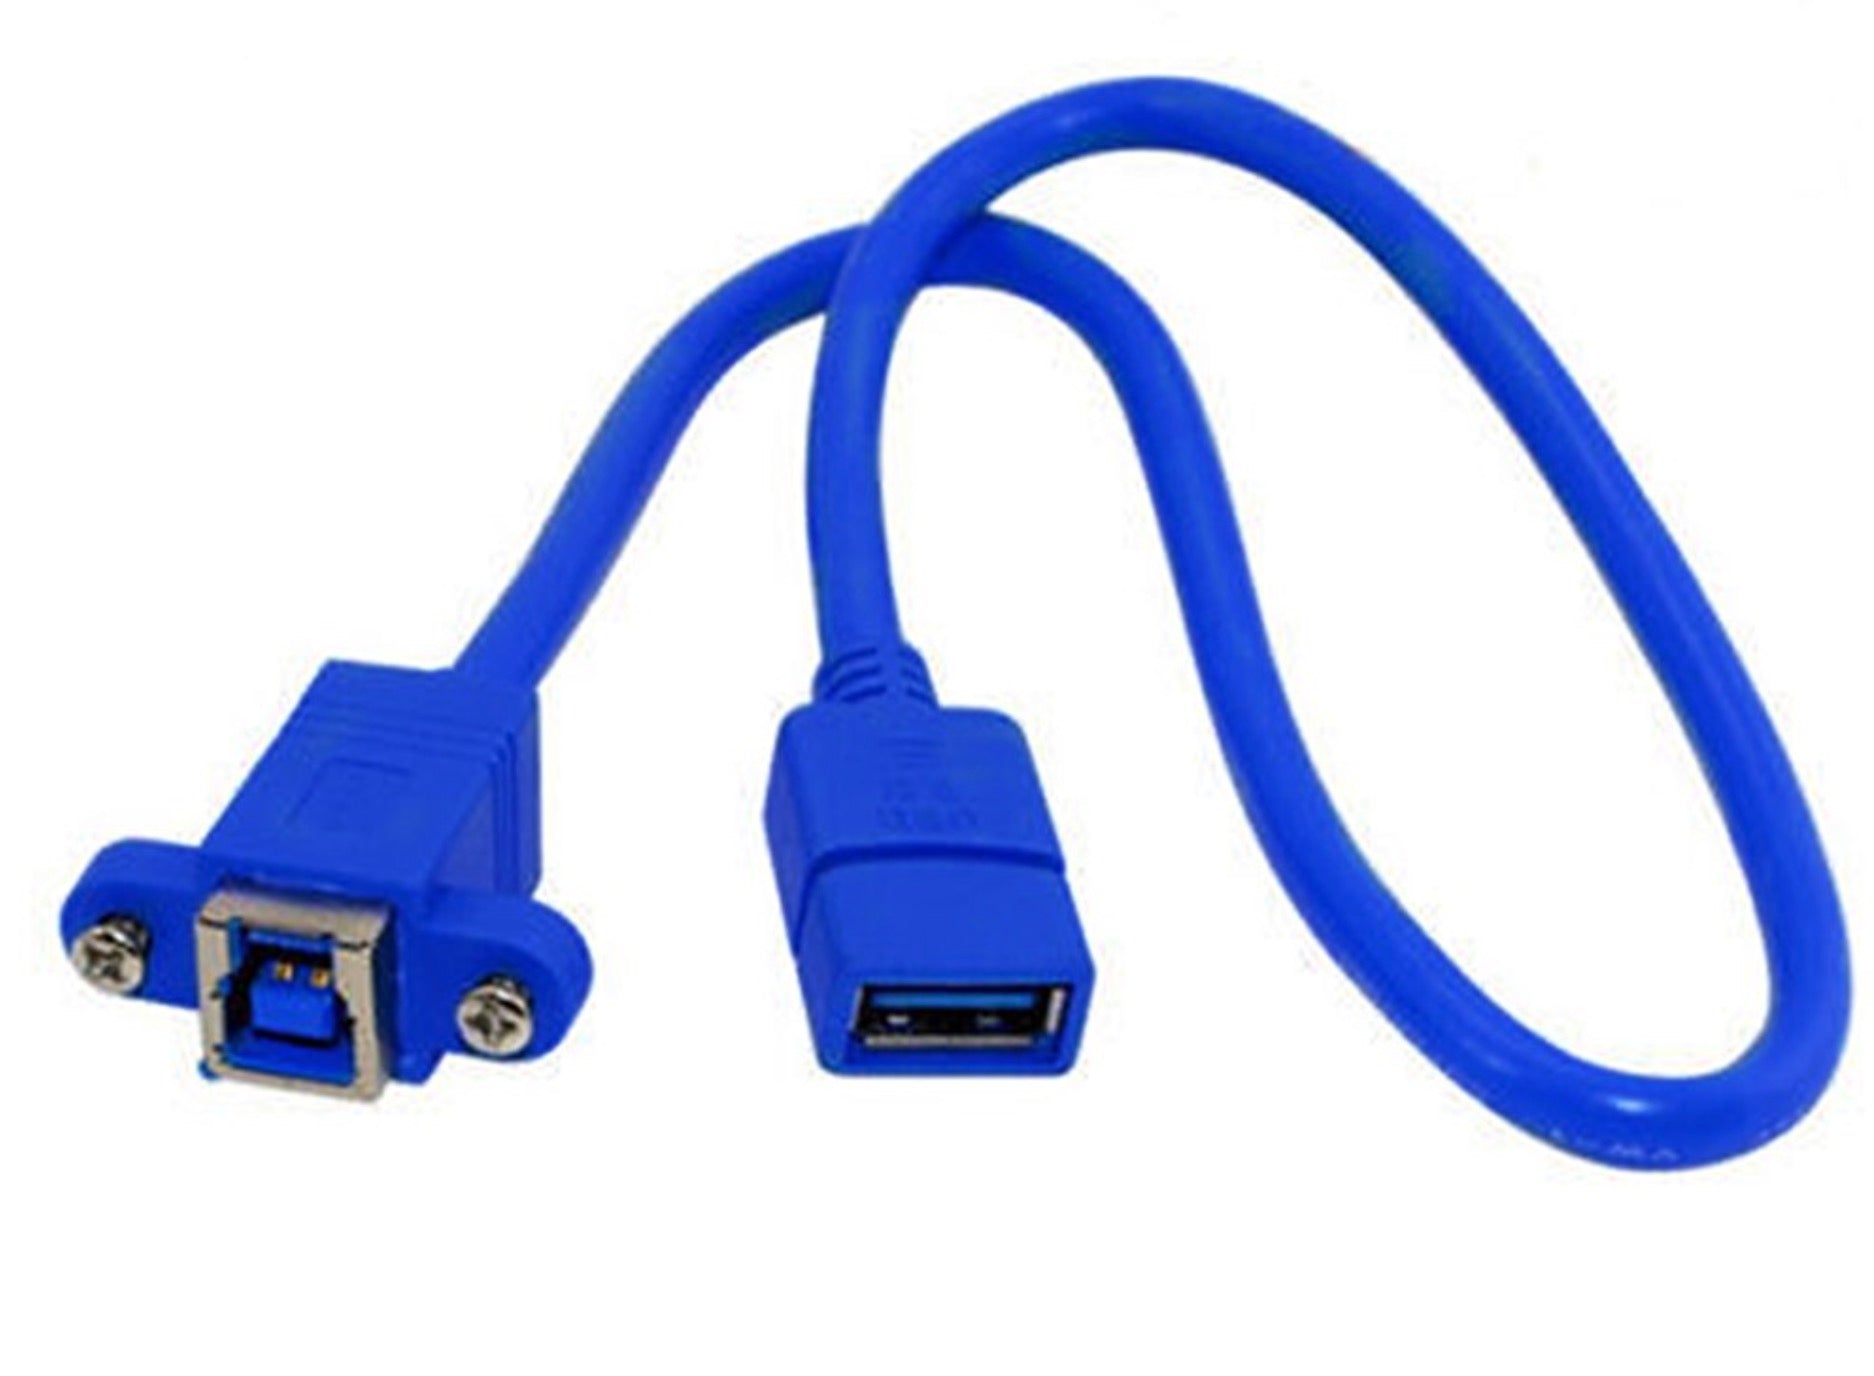 USB 3.0 Type A Female to USB 3.0 Type B Panel Mount Female Data Sync Cable 0.3m